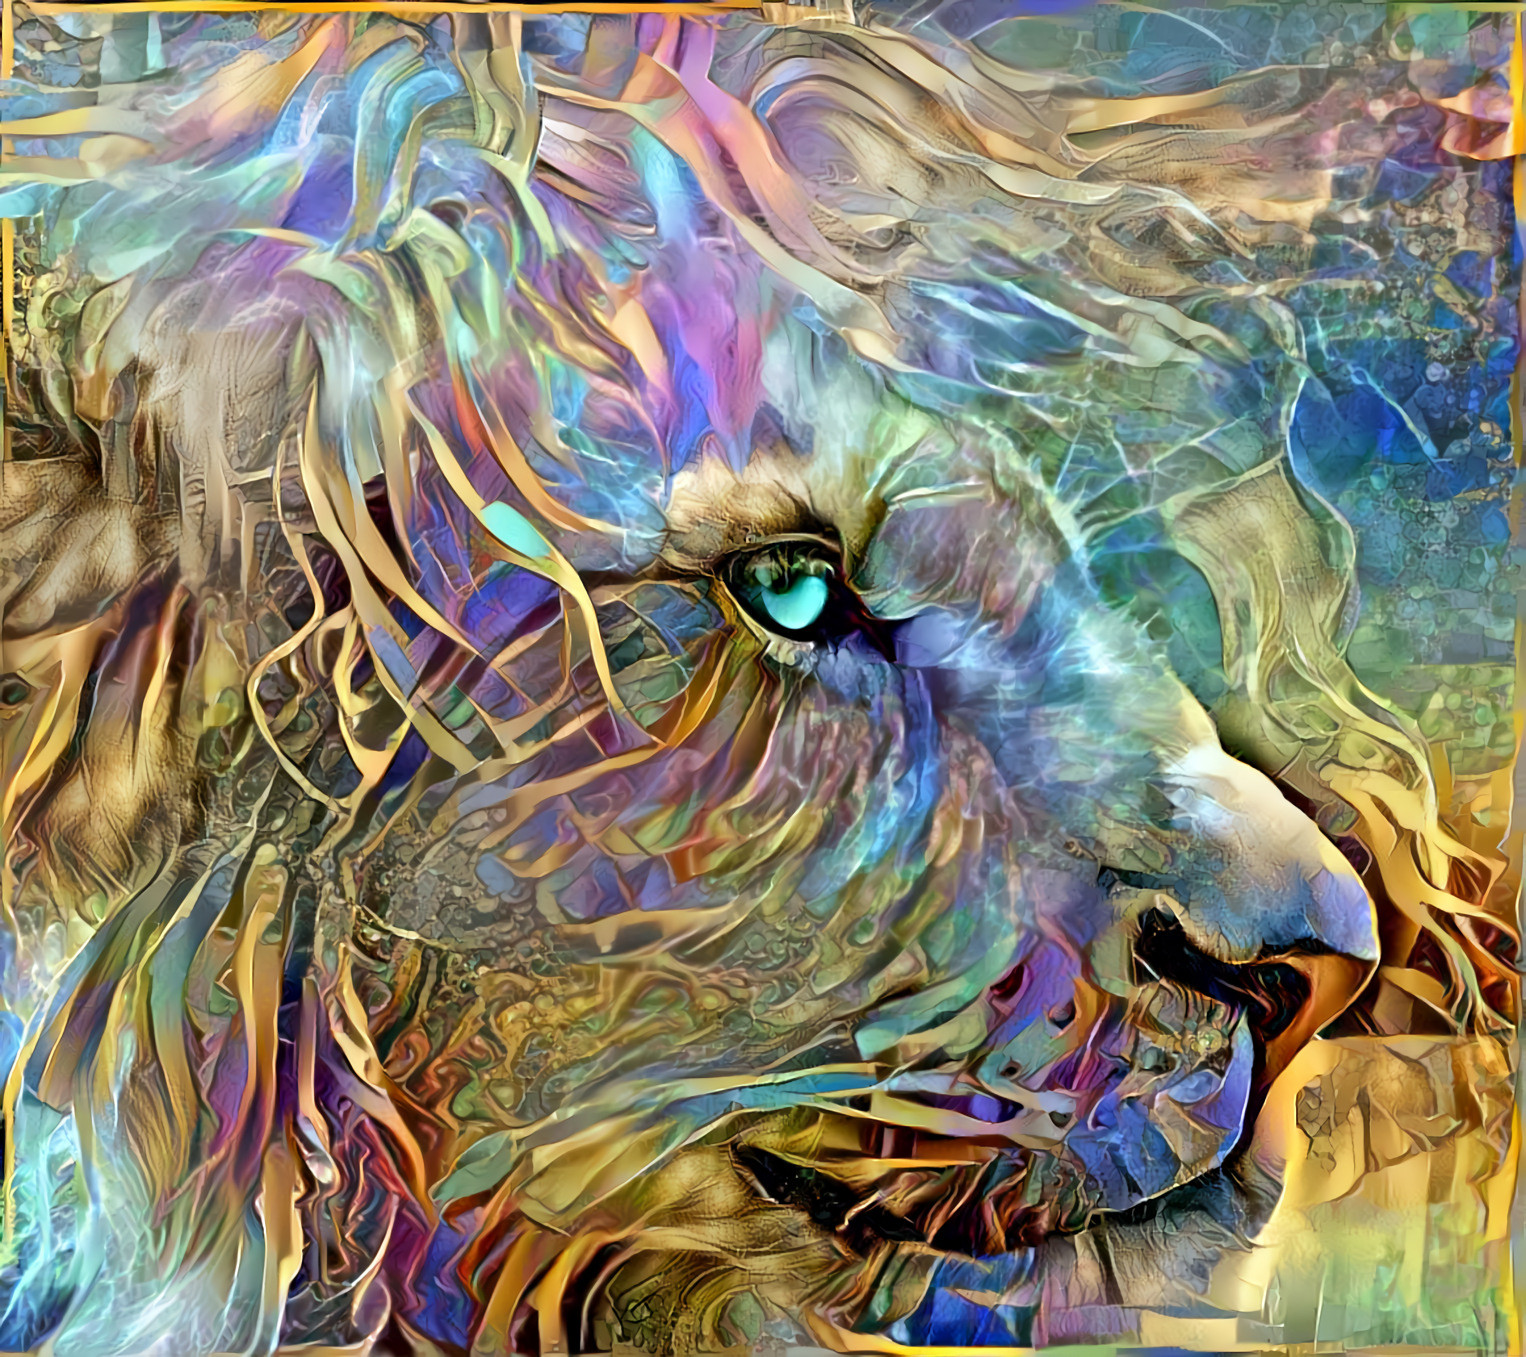 The Colorfully Beautiful Lion [FHD]